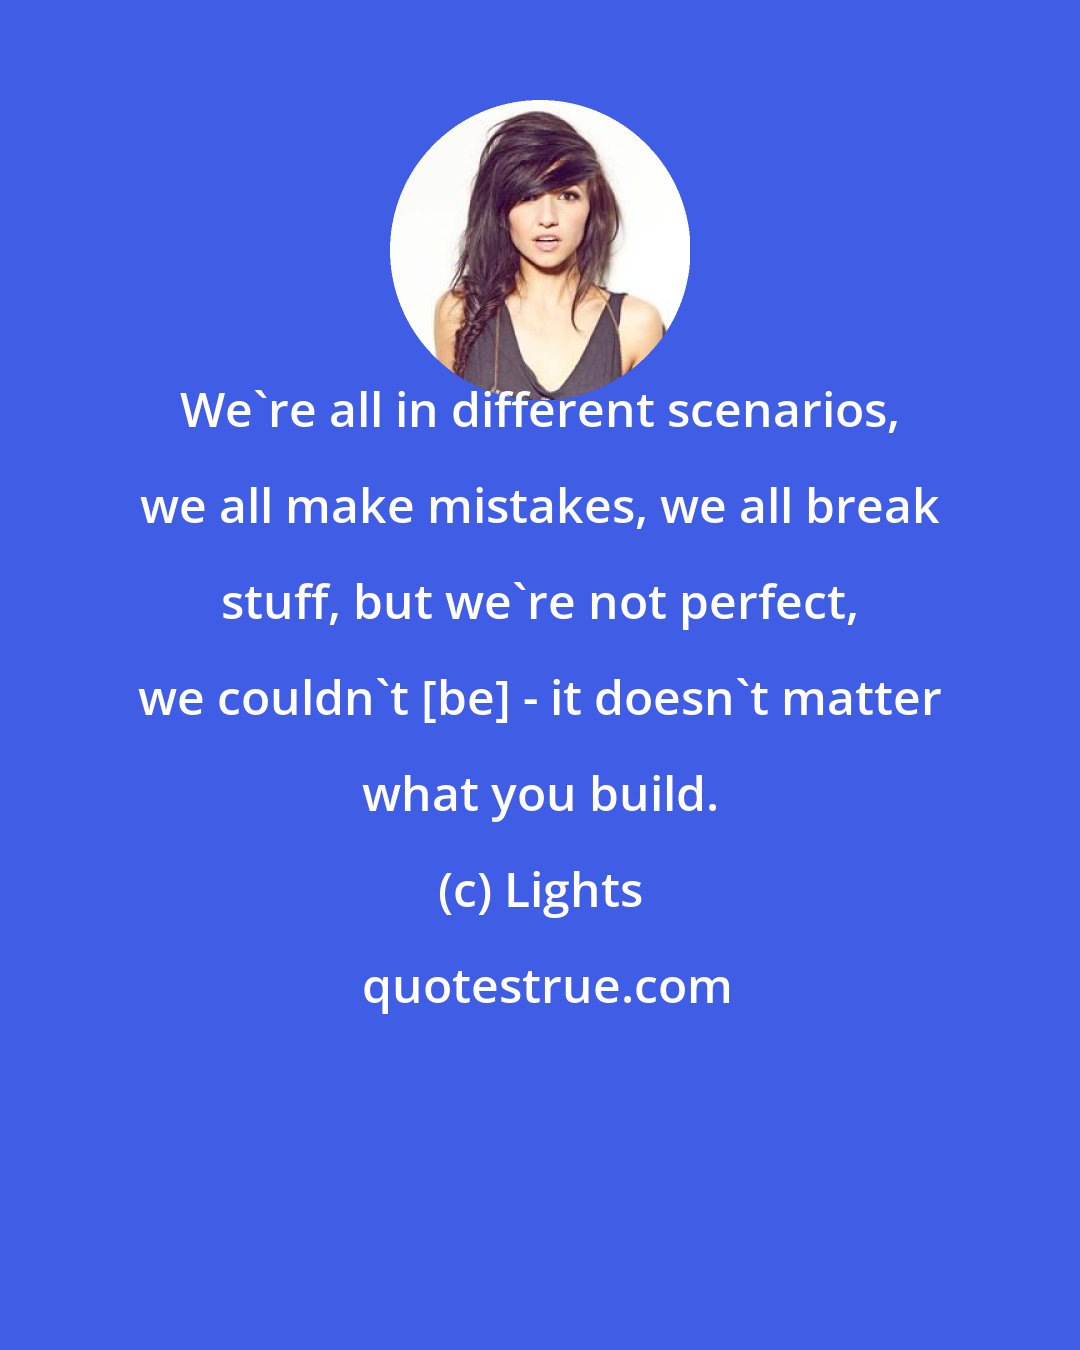 Lights: We're all in different scenarios, we all make mistakes, we all break stuff, but we're not perfect, we couldn't [be] - it doesn't matter what you build.